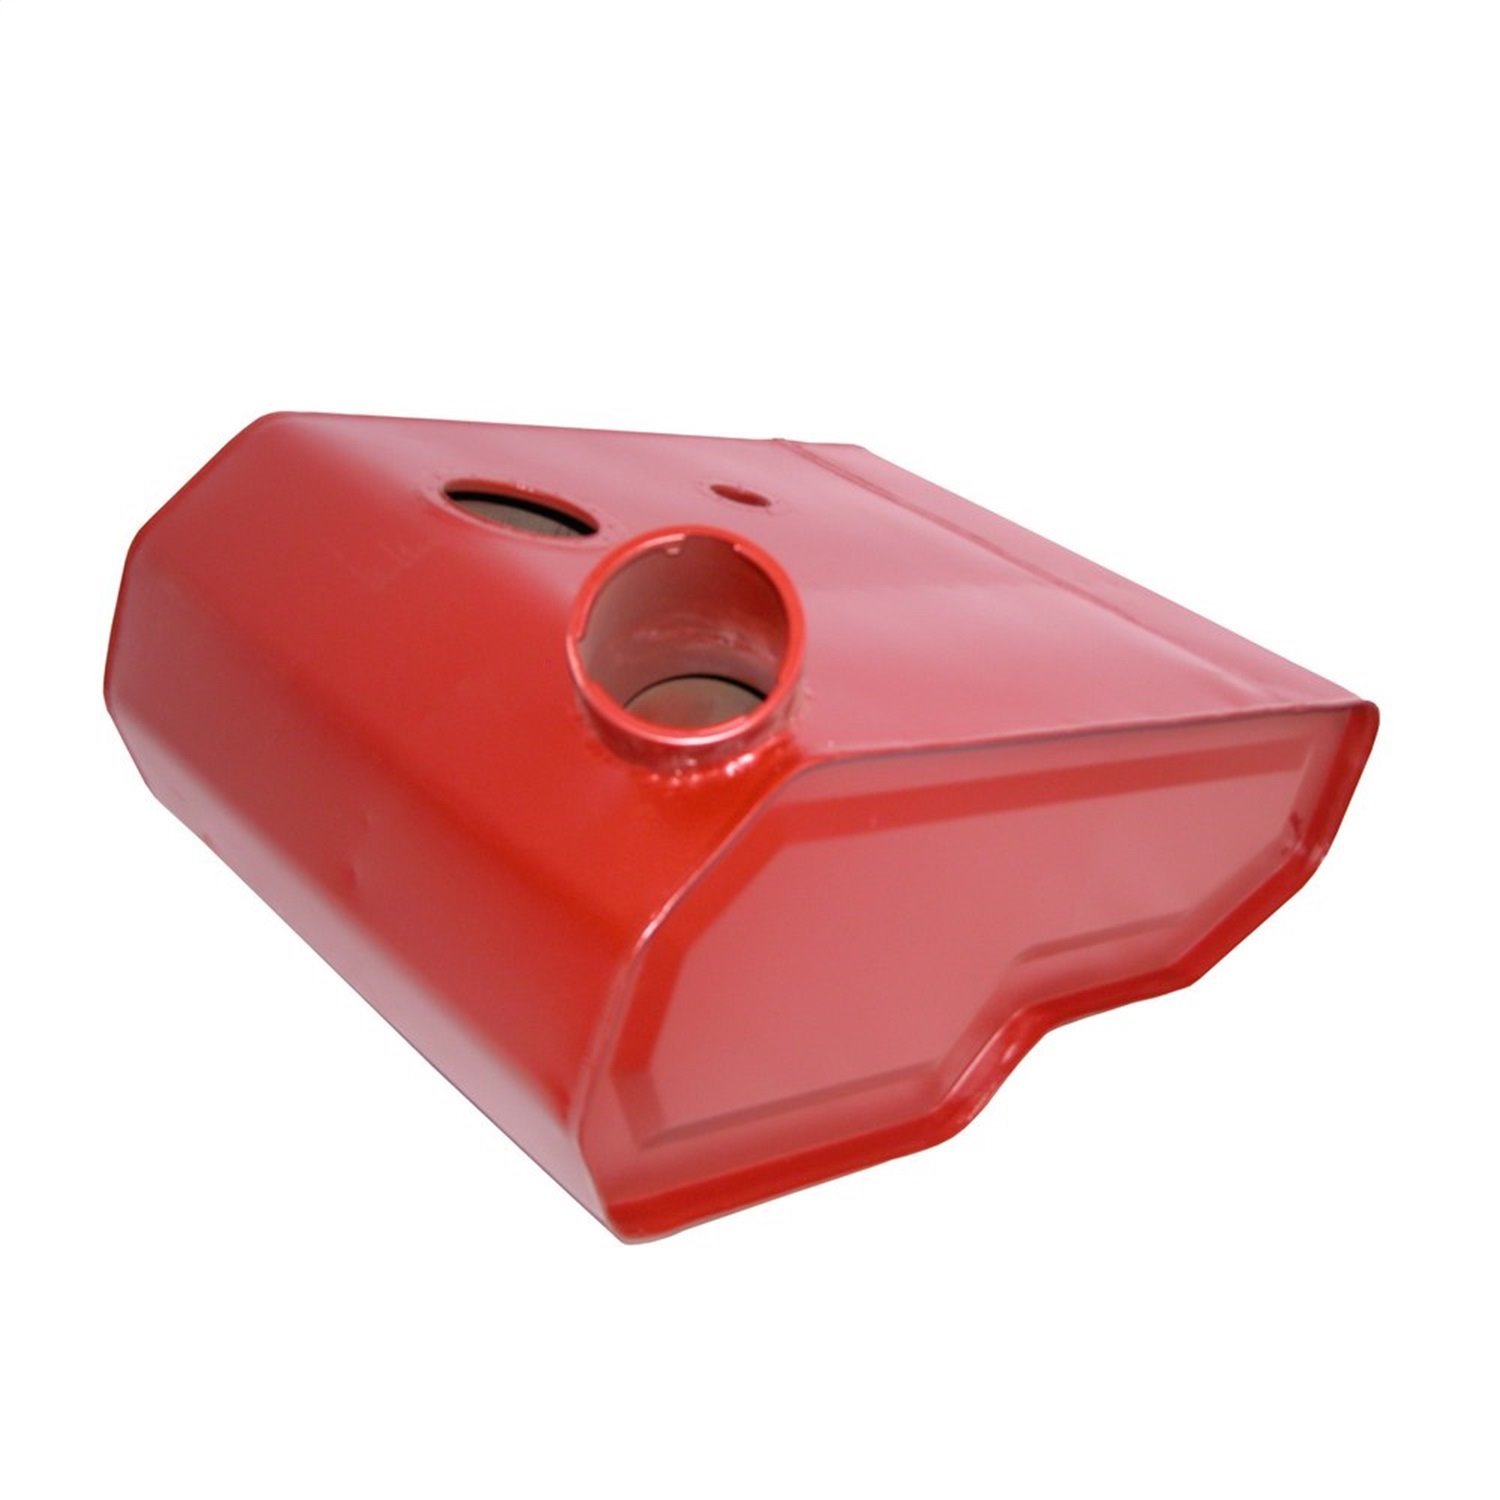 This reproduction steel Gas/Fuel tank from Omix-ADA mounts under the driver s seat and has the large